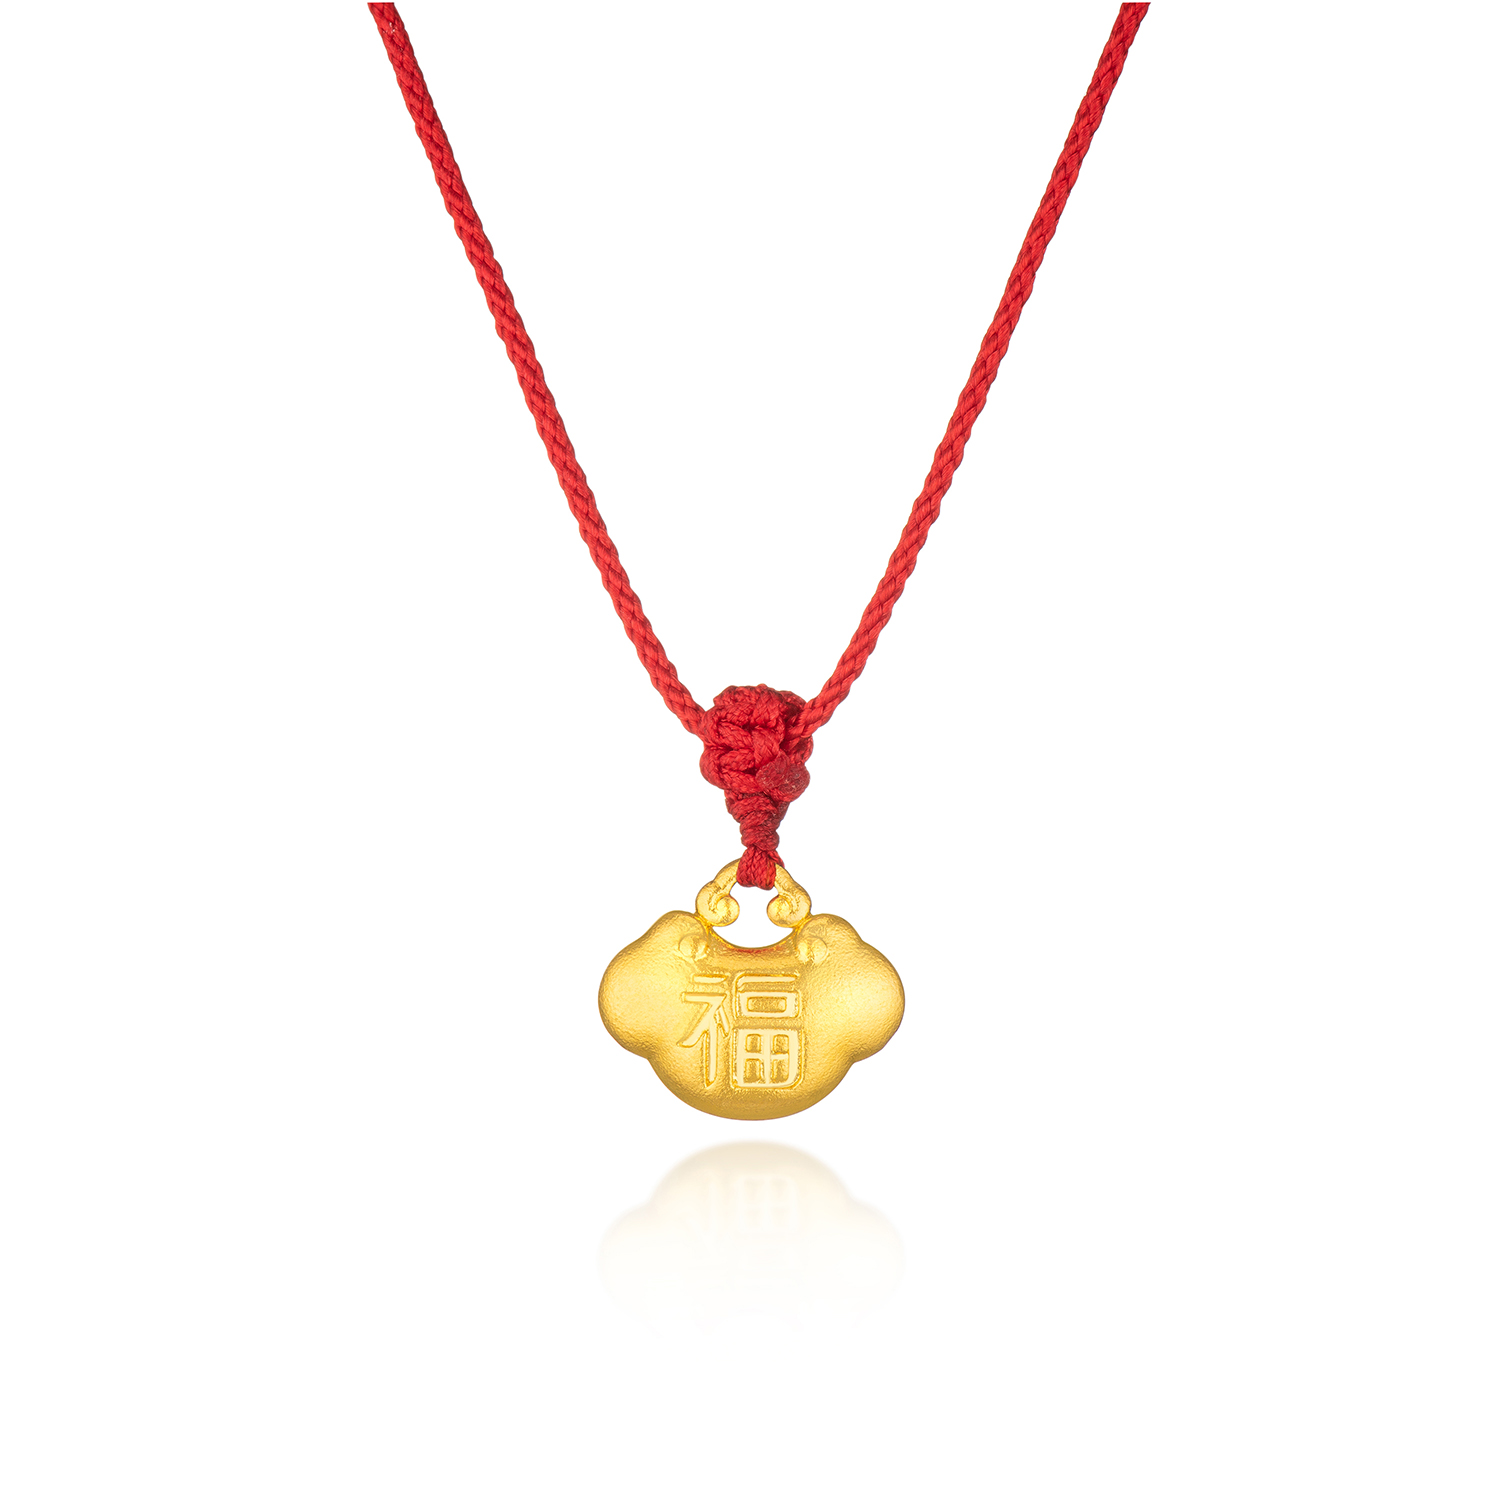 Heirloom Fortune Collection “Peace & Joy” Gold Baby Pendant